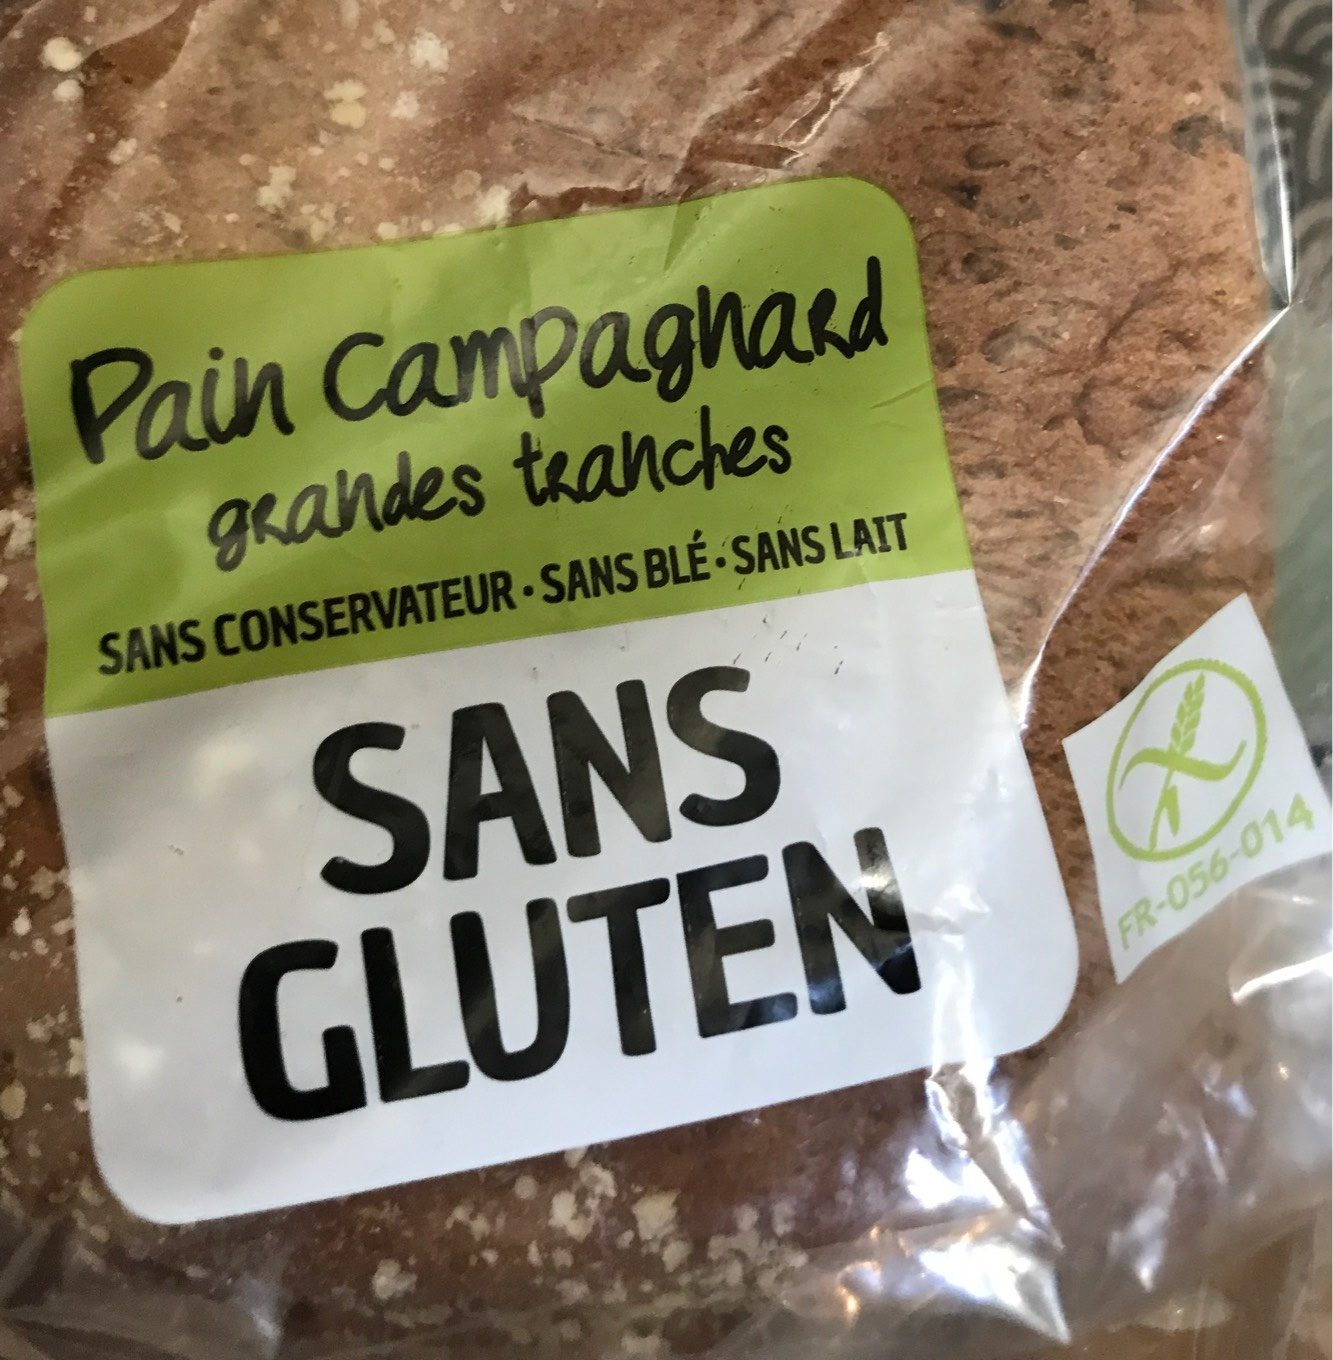 Pain campagnard grandes tranches sans gluten - Product - fr